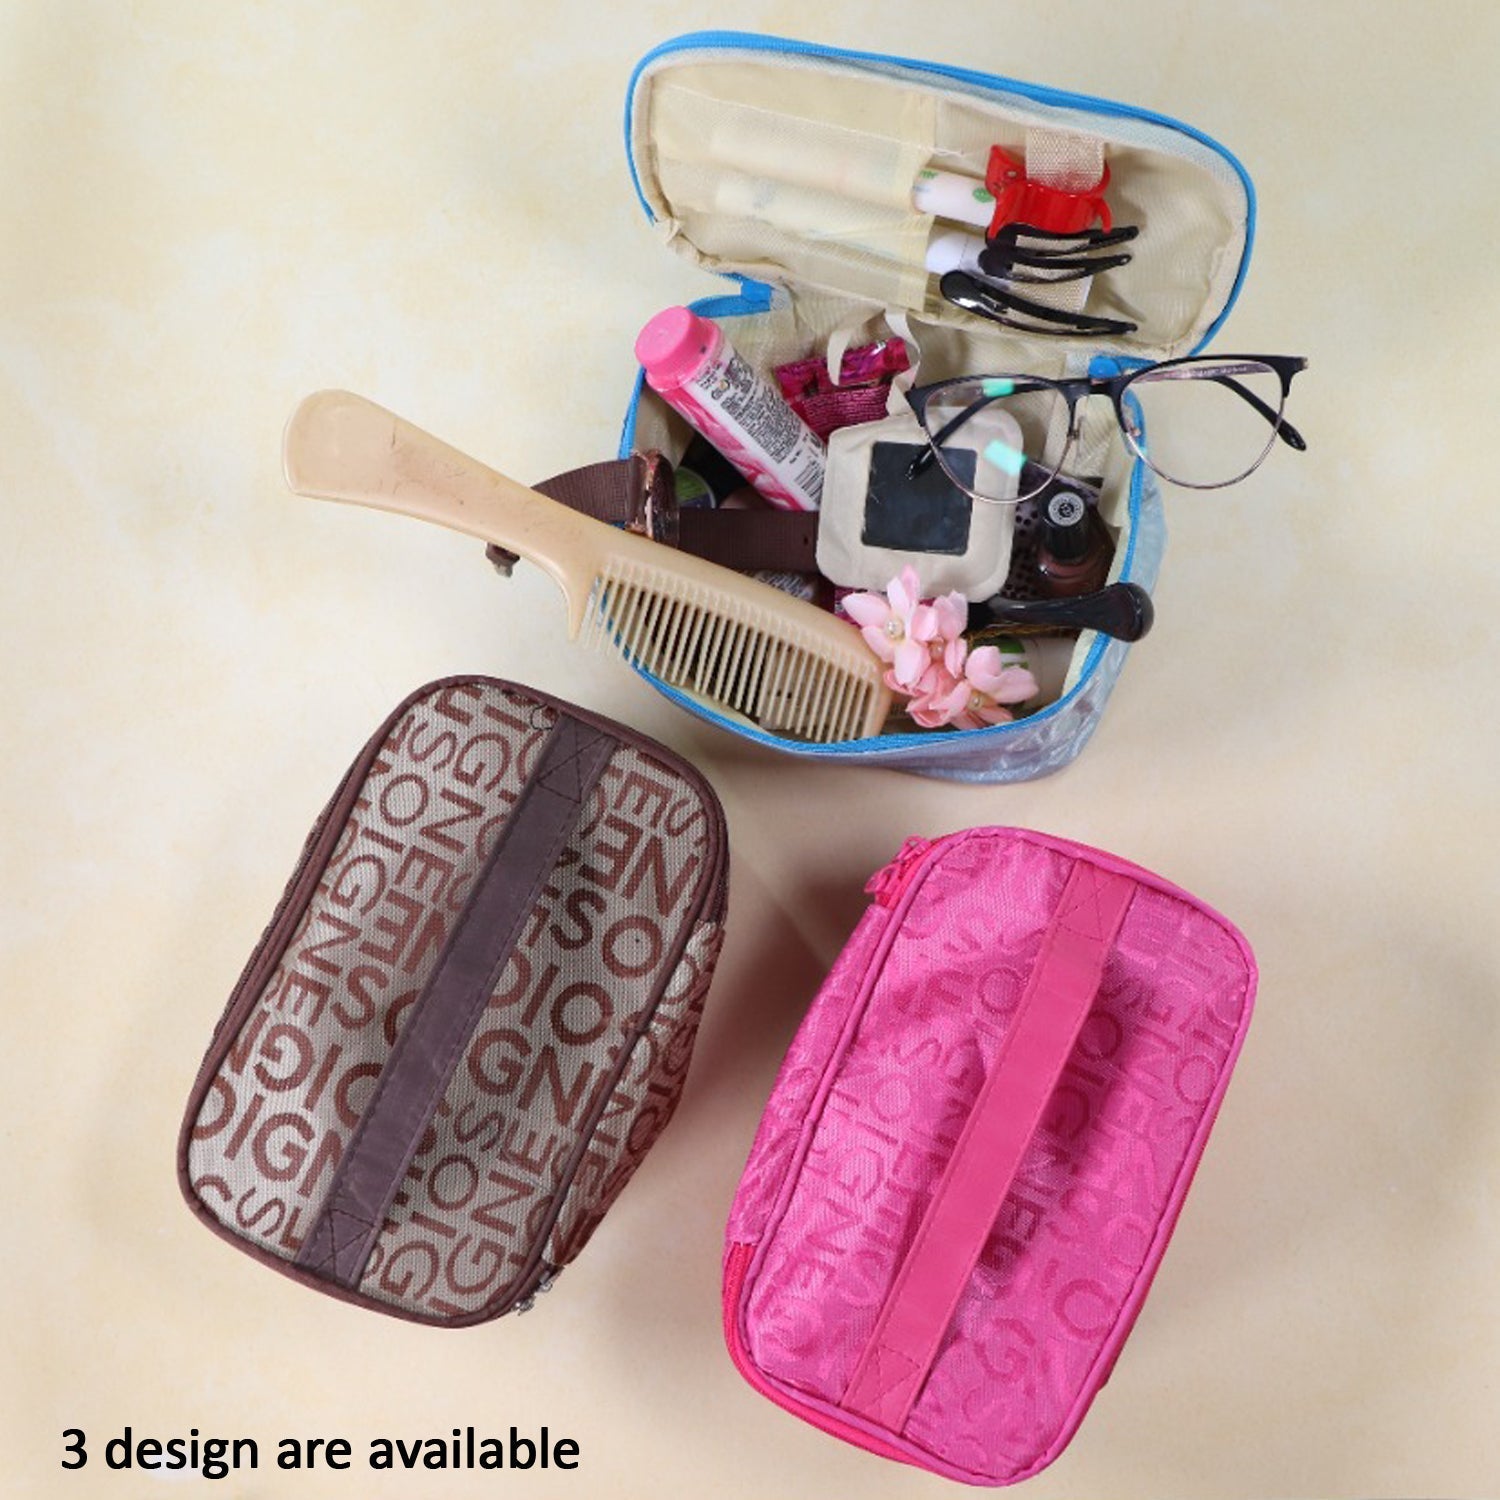 6228 PORTABLE MAKEUP BAG WIDELY USED BY WOMEN’S FOR STORING THEIR MAKEUP EQUIPMENT’S AND ALL WHILE TRAVELLING AND MOVING. 